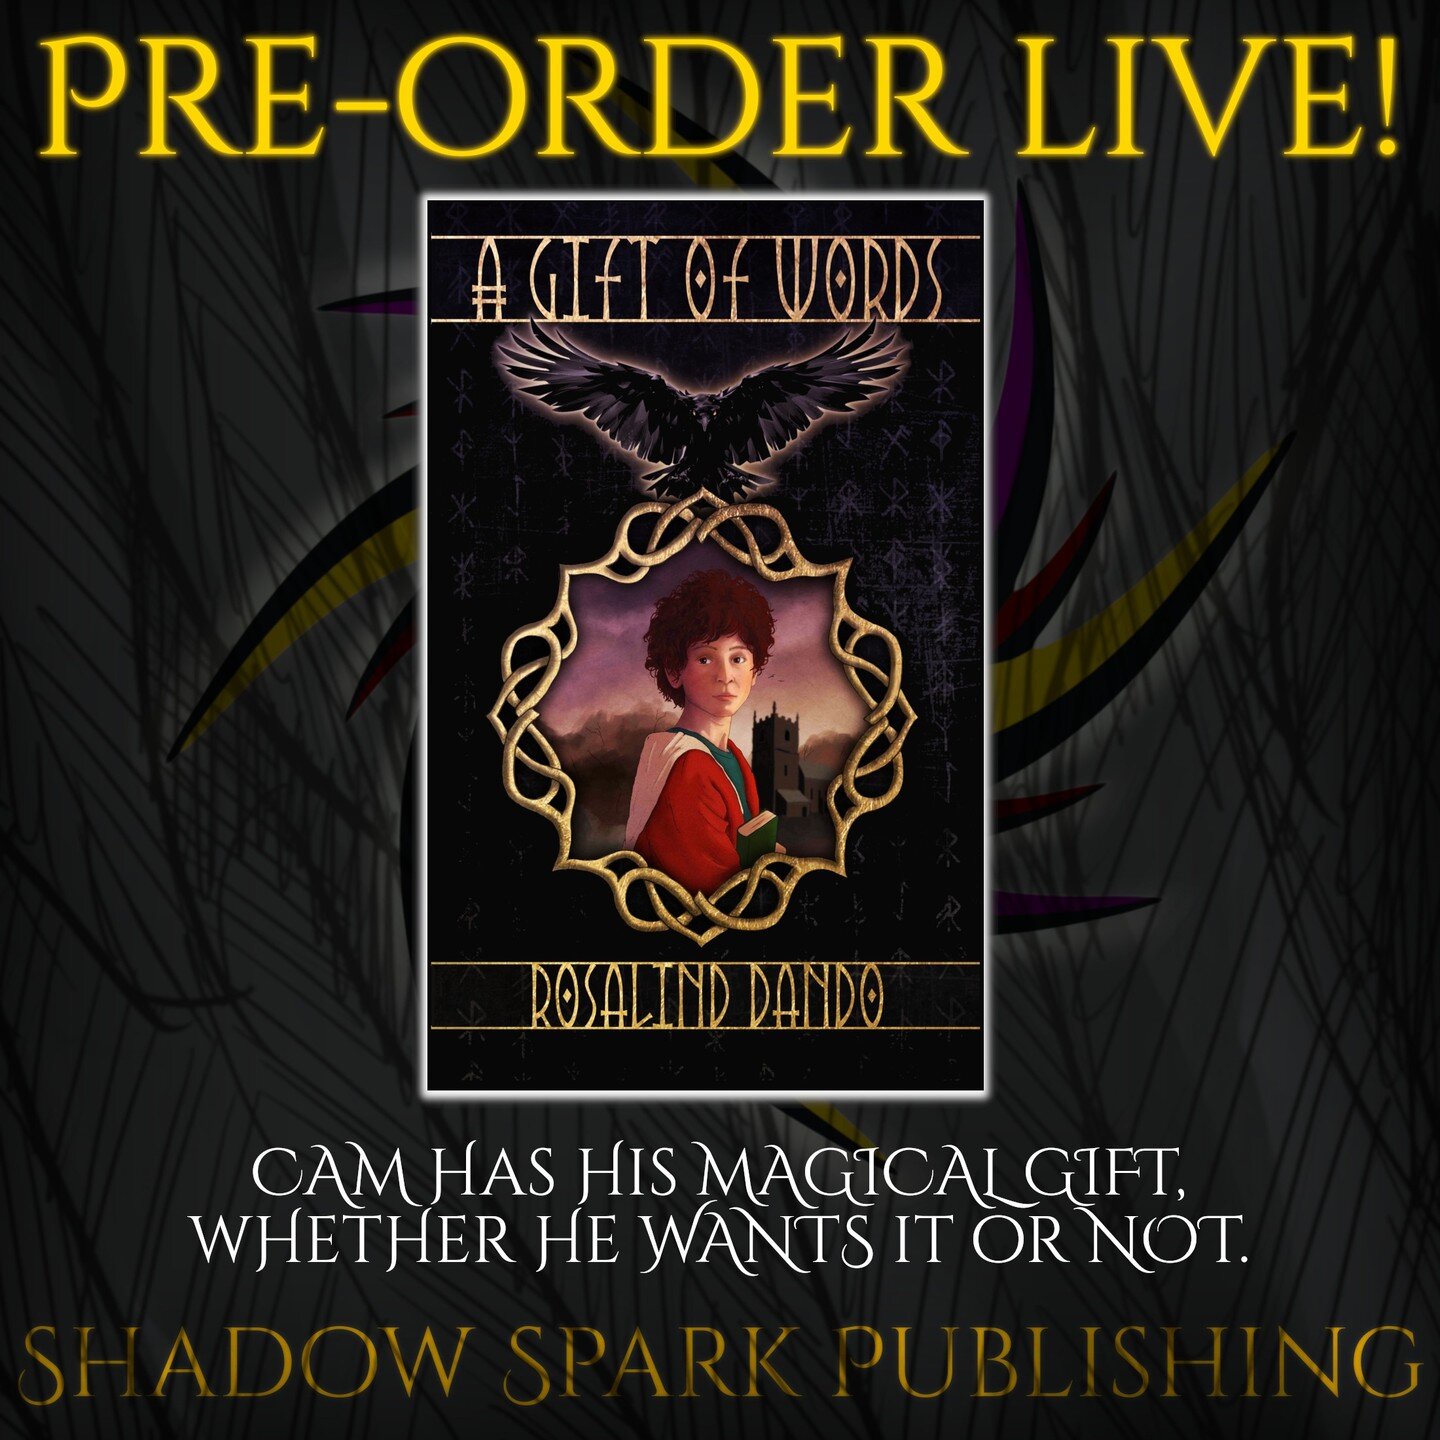 📖COVER REVEAL &amp; PREORDER AVAILABLE!

We are so excited to share the cover of A GIFT OF WORDS by Rosalind Dando (@rosalind_dando)!

This magical middle grade contemporary fantasy releases April 30, and the ebook is available for preorder!

Cam ha